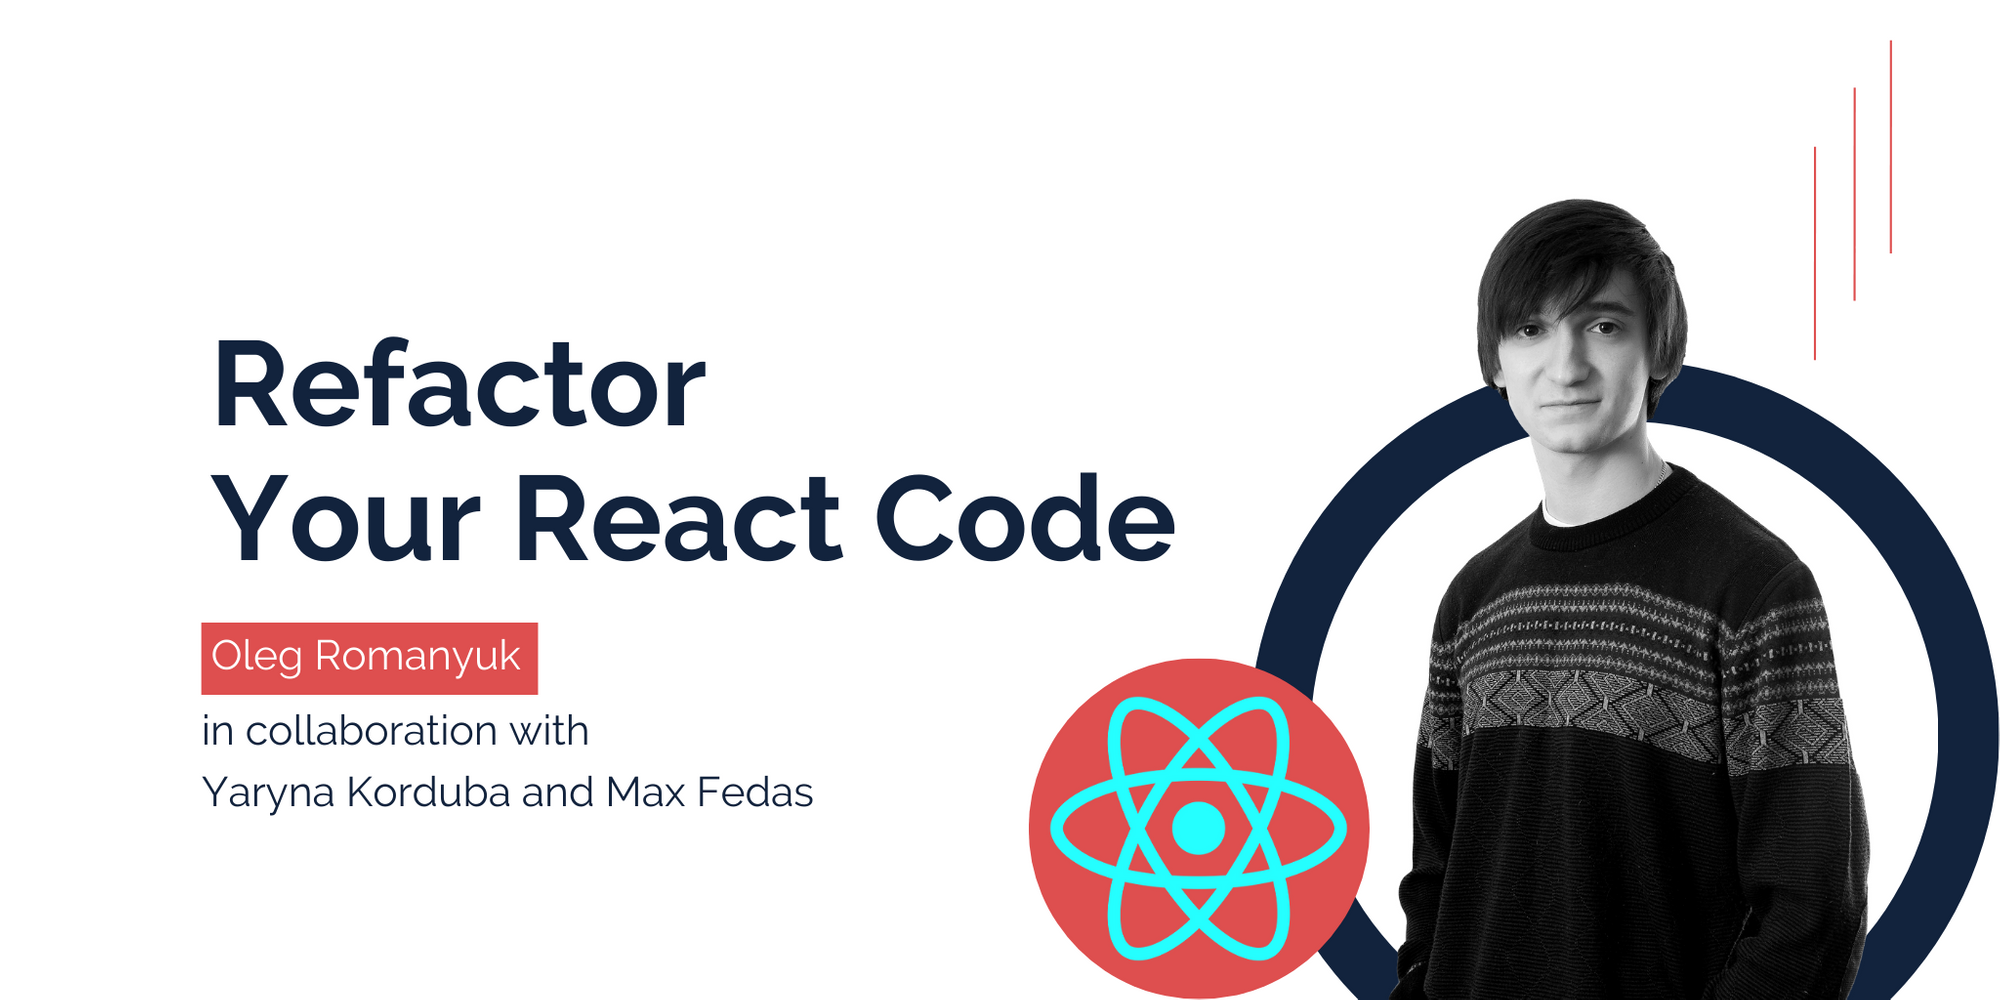 Refactoring React Code: Why and How to Refactor Your React Code